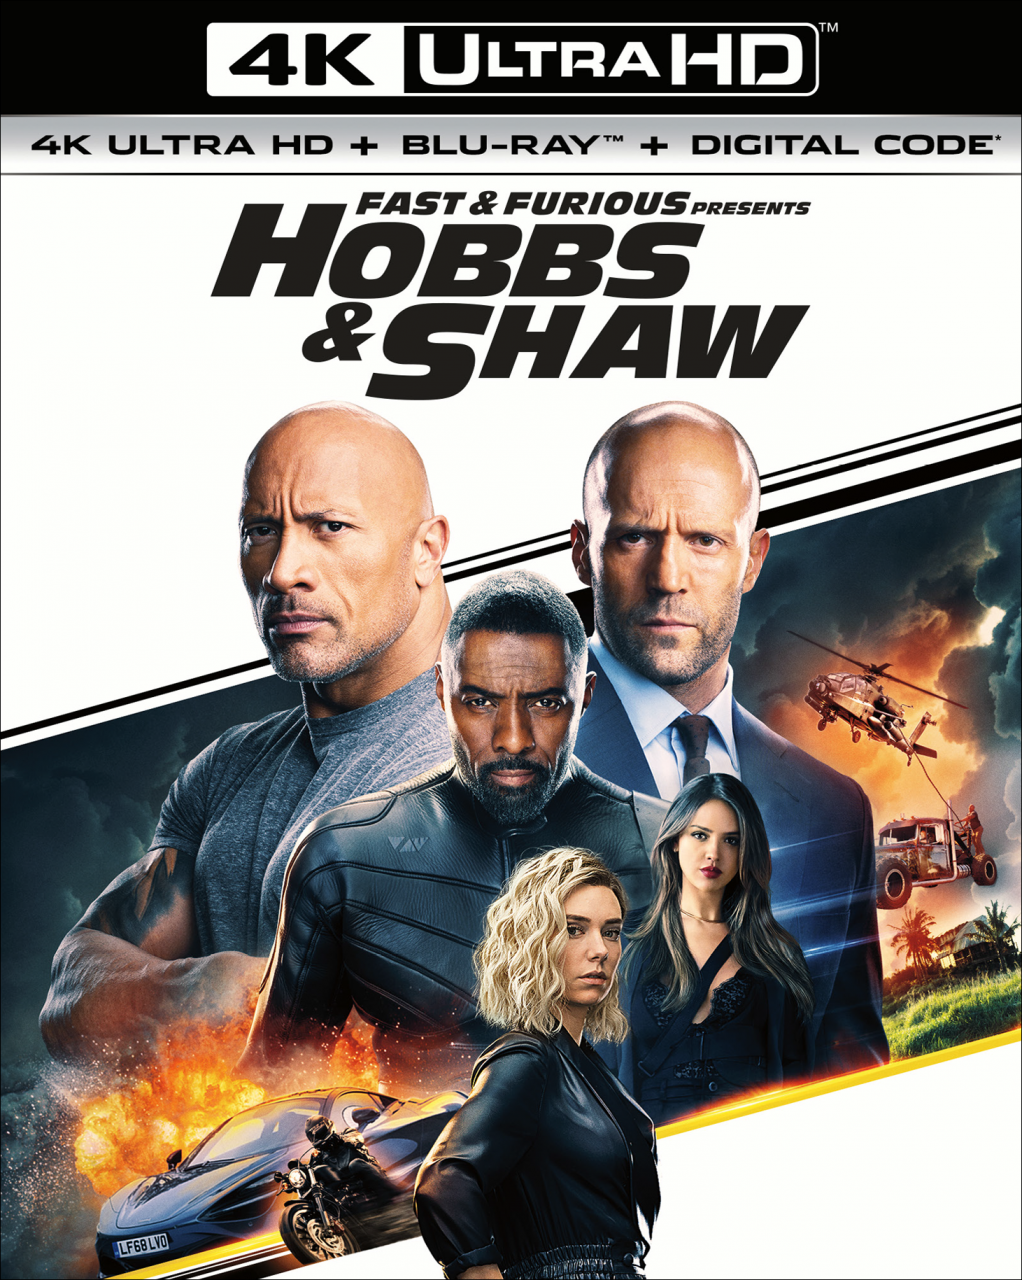 Fast & Furious presents Hobbs & Shaw 4K Ultra HD Combo Pack cover (Universal Pictures Home Entertainment)